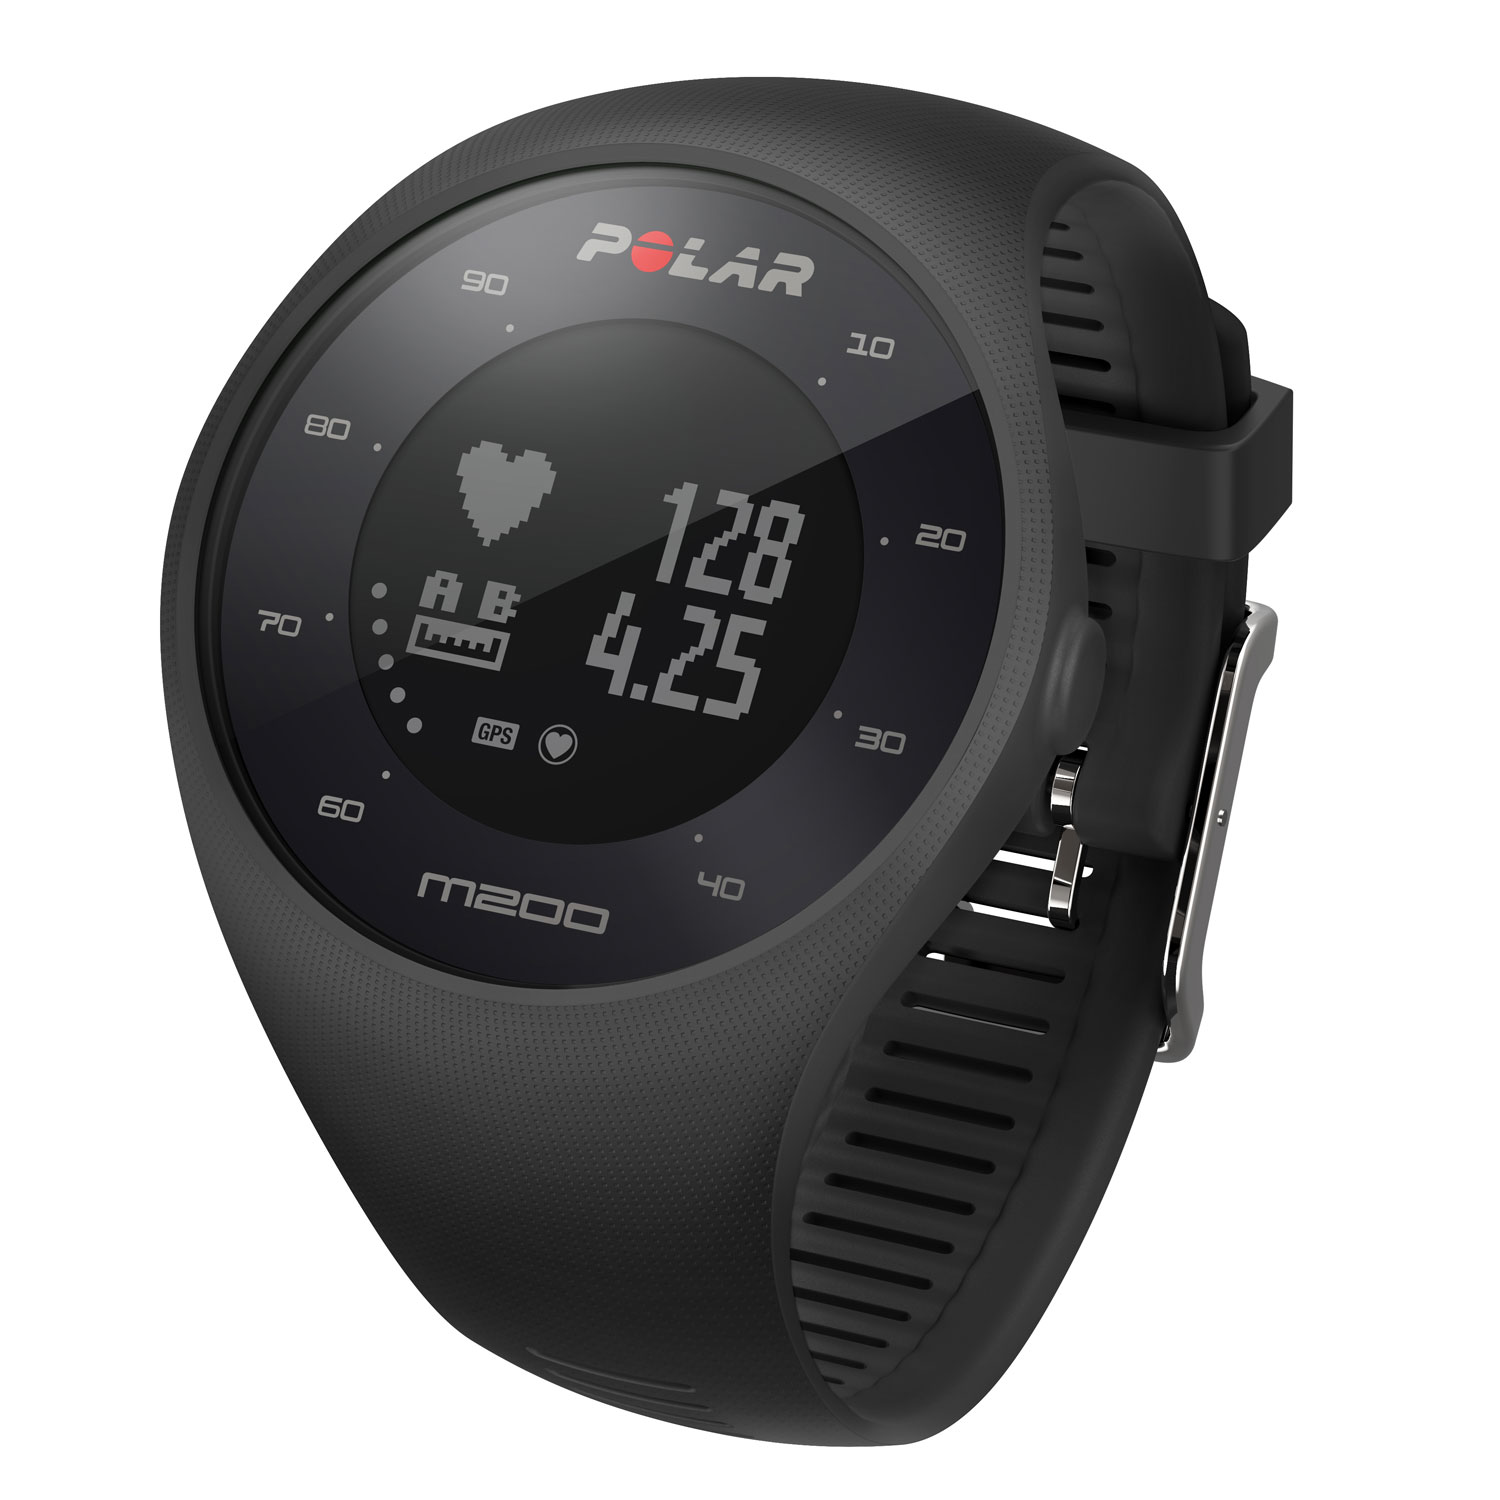 Polar M200 Sports watch designed for running with 24/7 activity